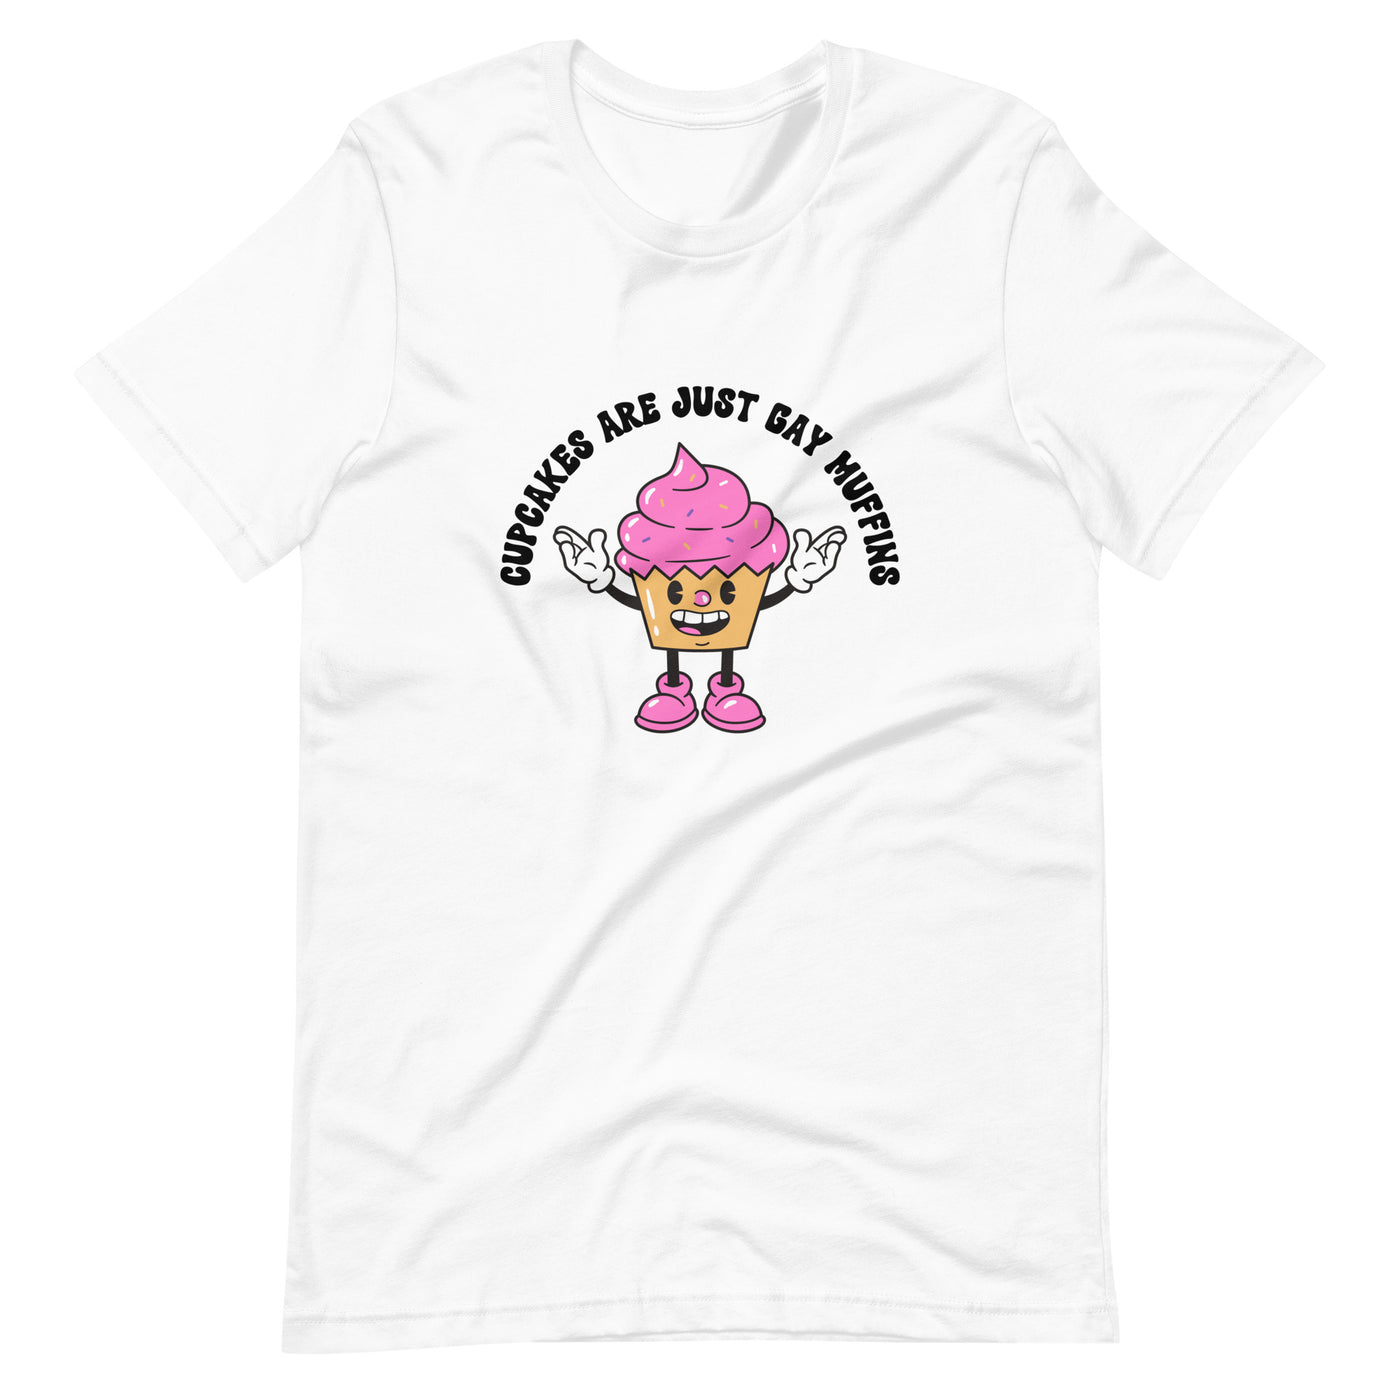 Pride Clothes - Fun & Flirty Cupcakes Are Just Gay Muffins T-Shirt - White